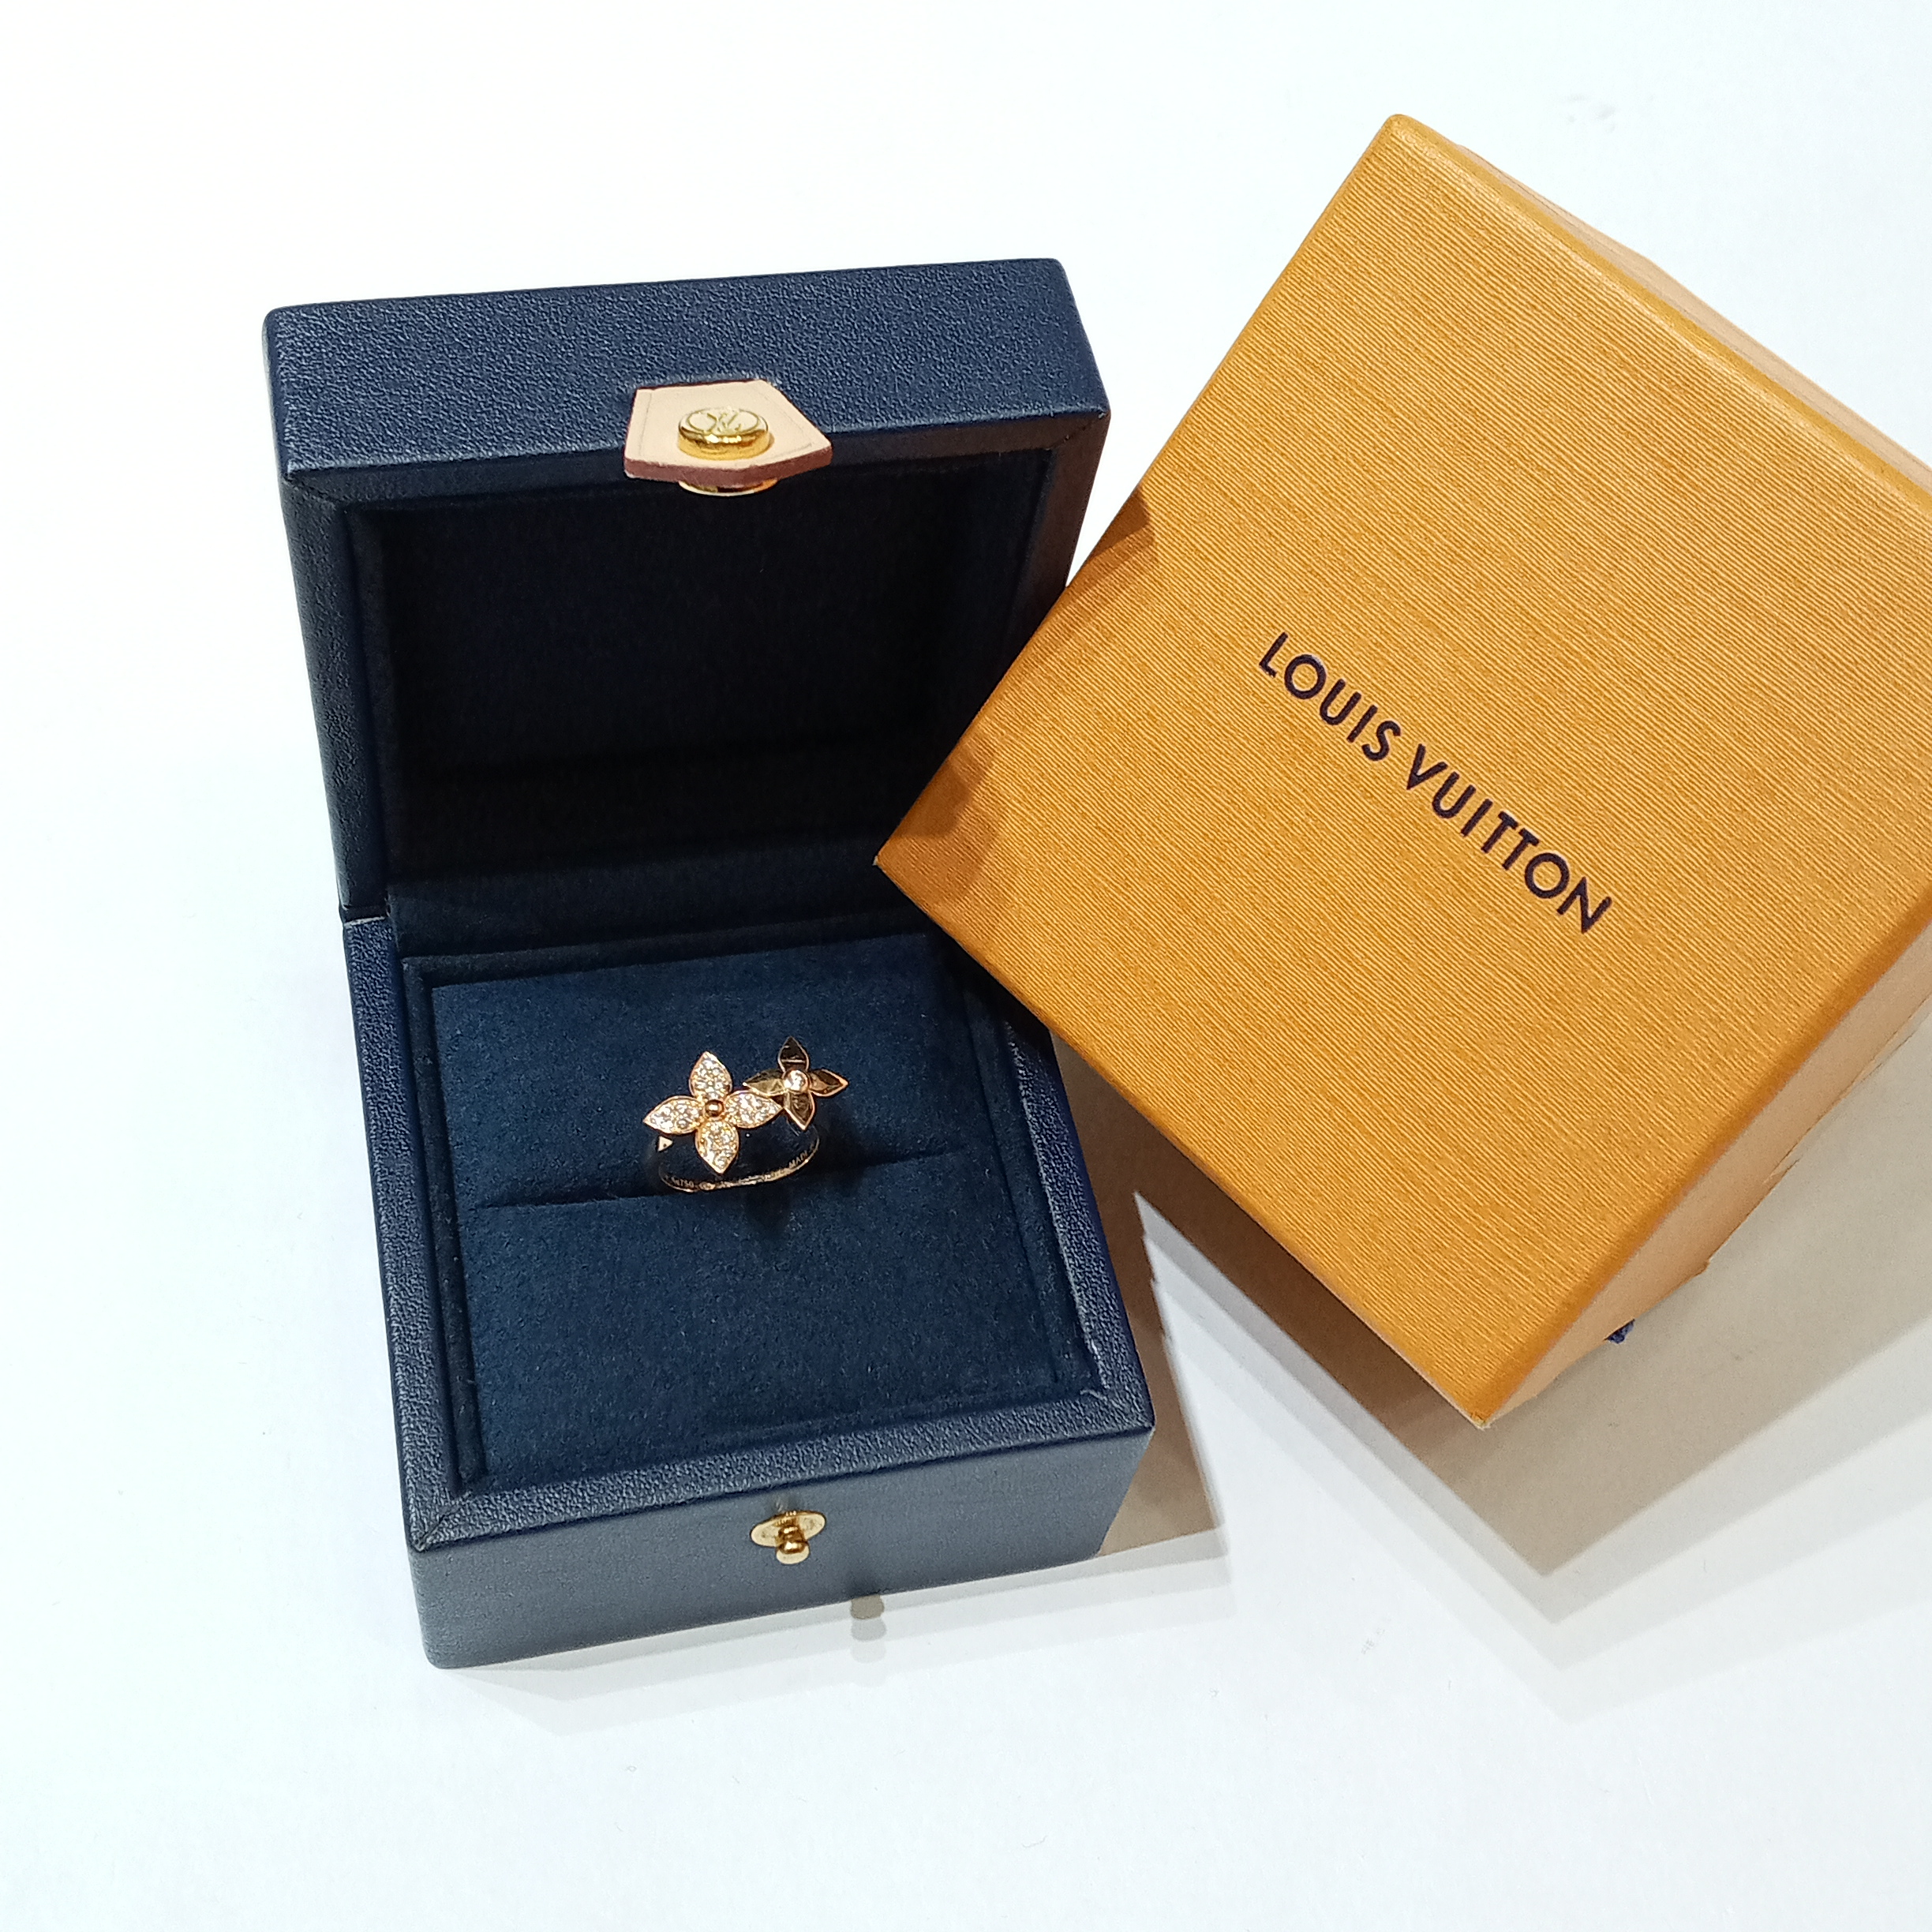 Louis Vuitton Star Blossom Ring, White Gold and Diamonds Grey. Size 53